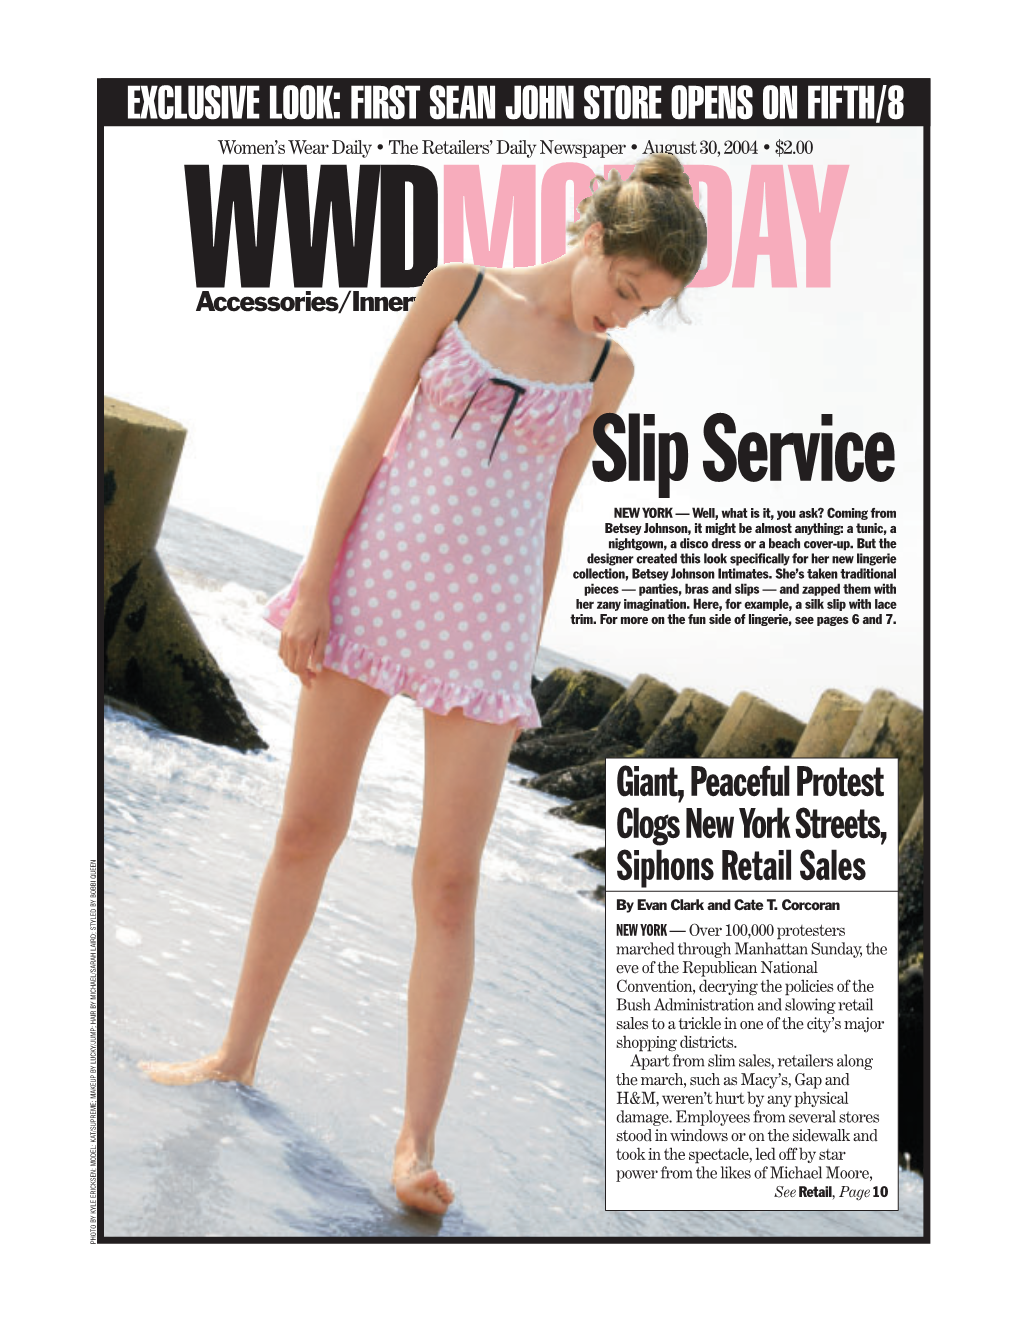 Slip Service NEW YORK — Well, What Is It, You Ask? Coming from Betsey Johnson, It Might Be Almost Anything: a Tunic, a Nightgown, a Disco Dress Or a Beach Cover-Up